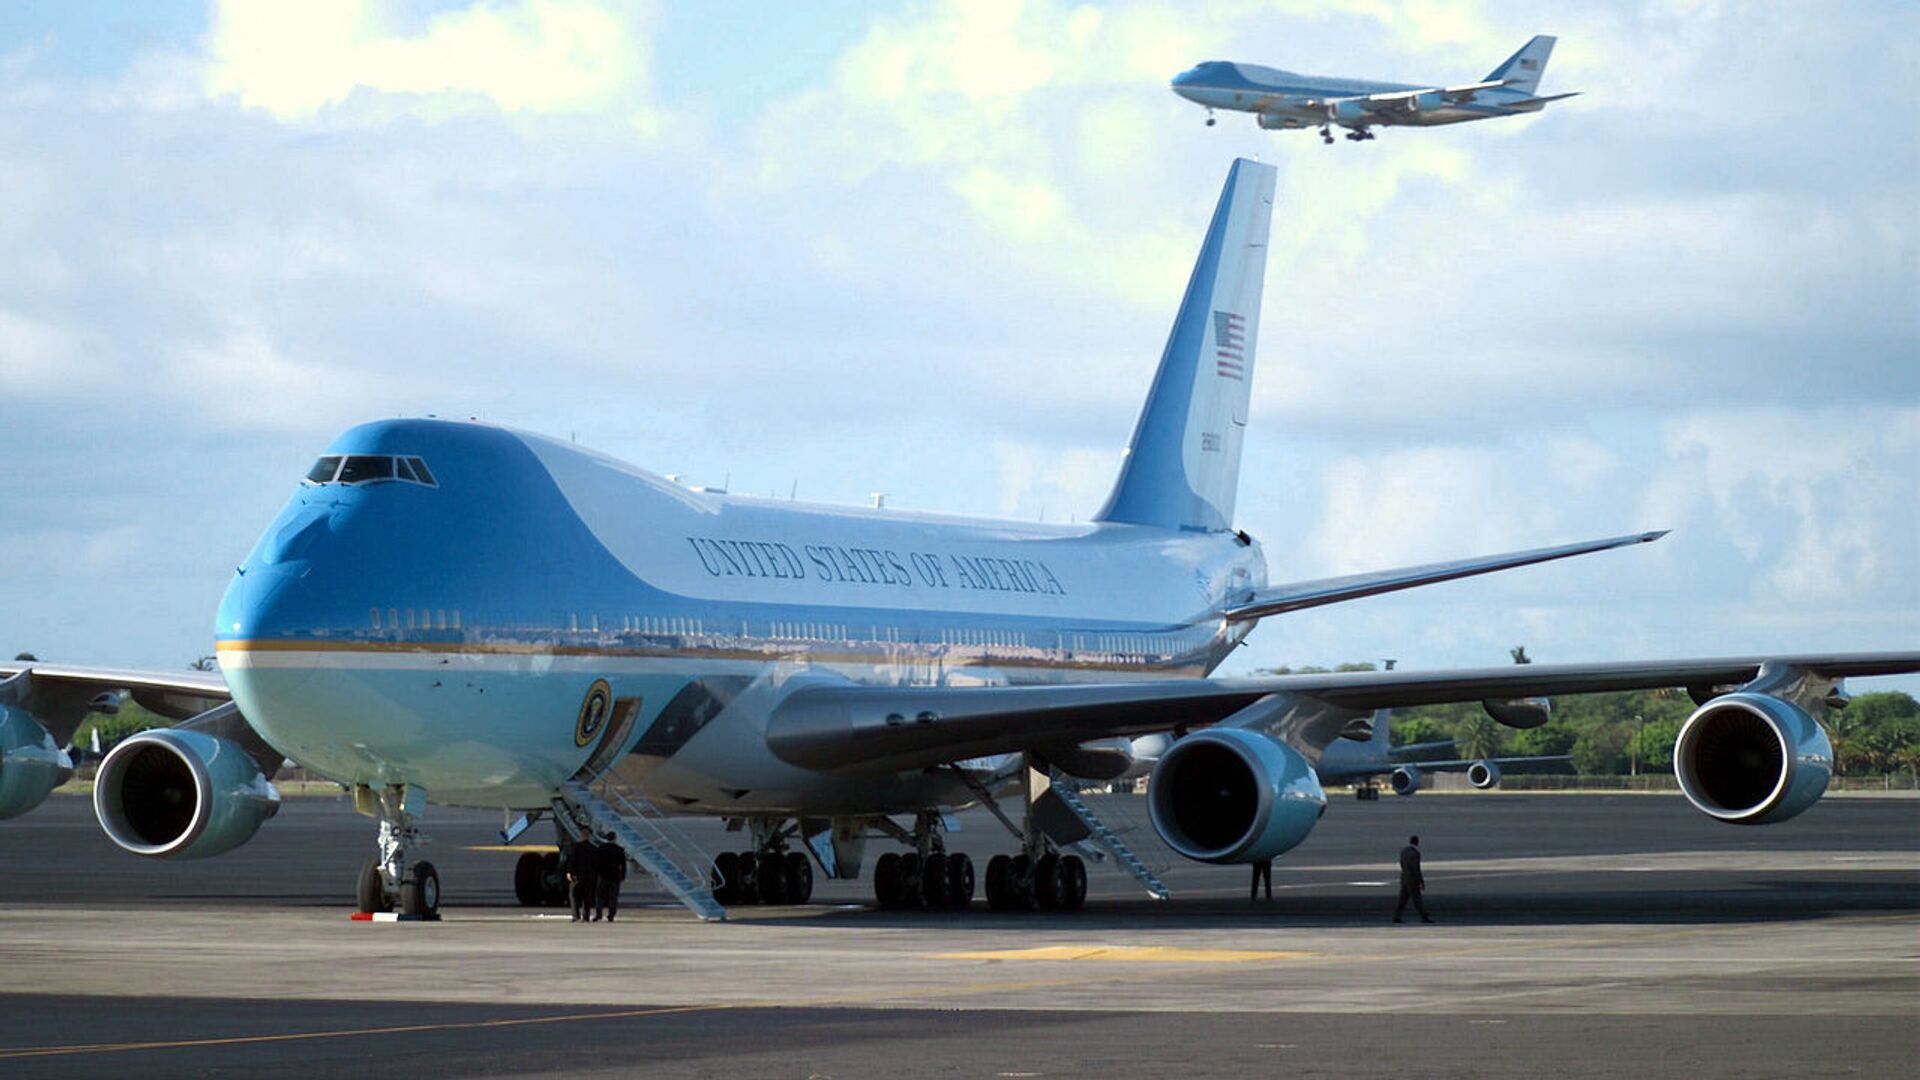 Air Force One lands at Hickam Air Force (AFB) with US President George W. Bush on board for his first visit to Hawaii while holding office. On the ground, the second Boeing VC-25A. - Sputnik International, 1920, 20.09.2021